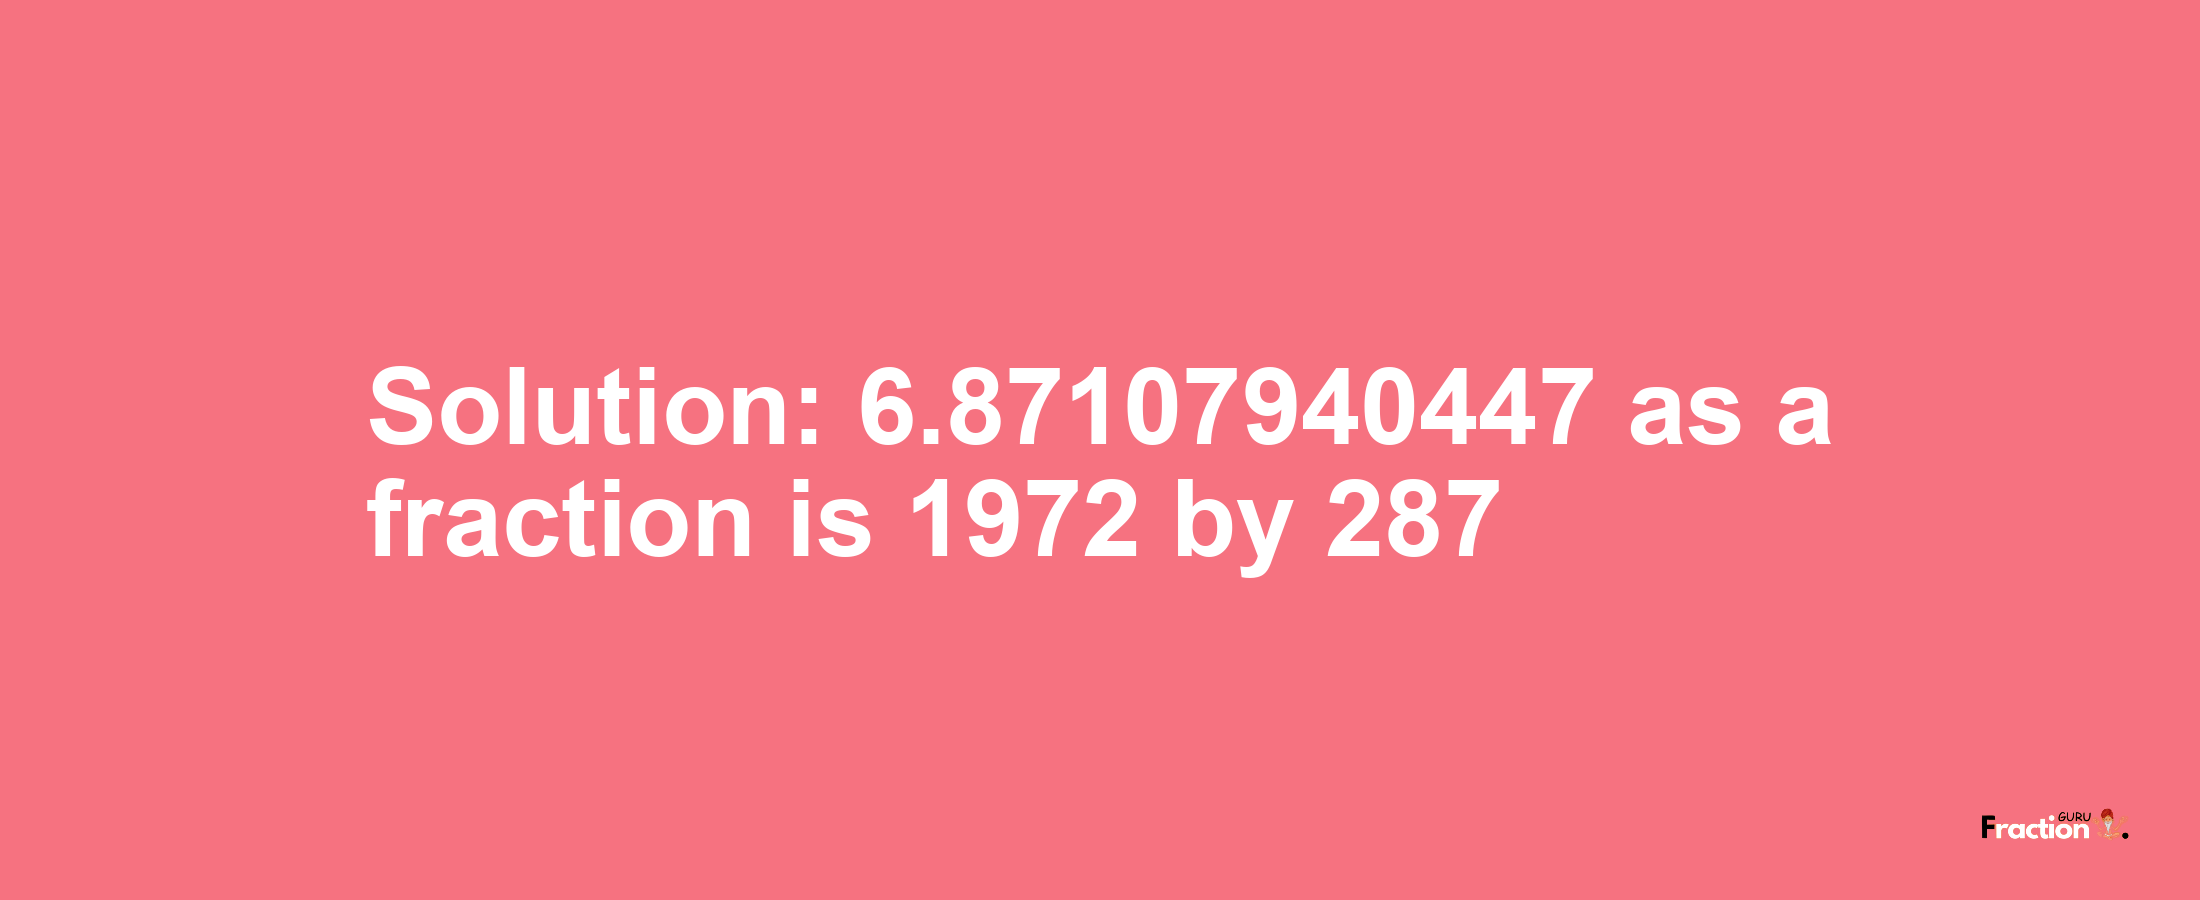 Solution:6.87107940447 as a fraction is 1972/287